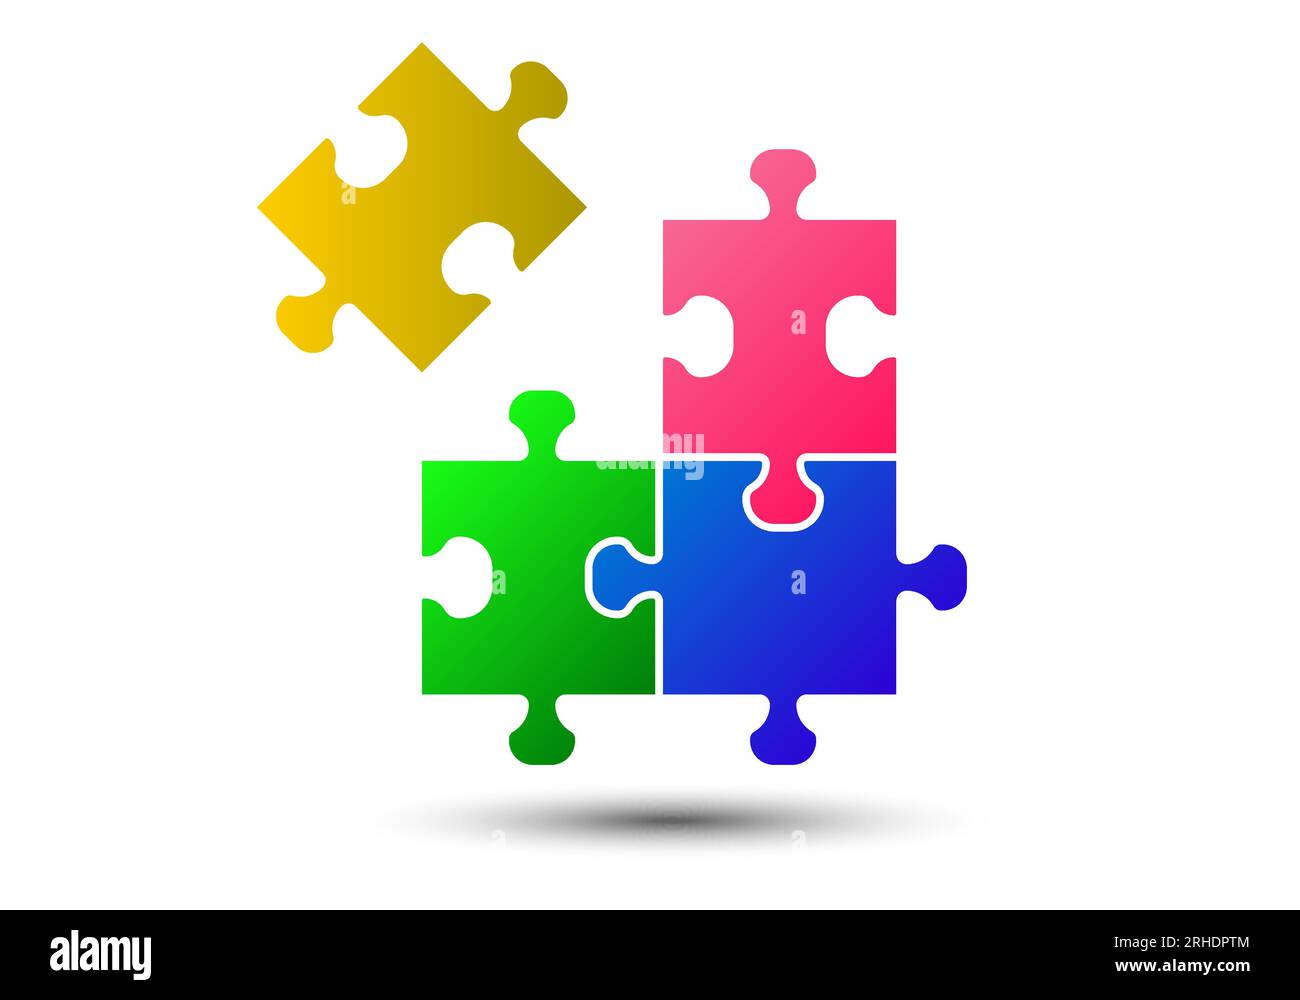 Puzzle pieces vector illustration isolated on white background. Puzzle pieces vector set. Separate puzzle pieces. Stock Vector